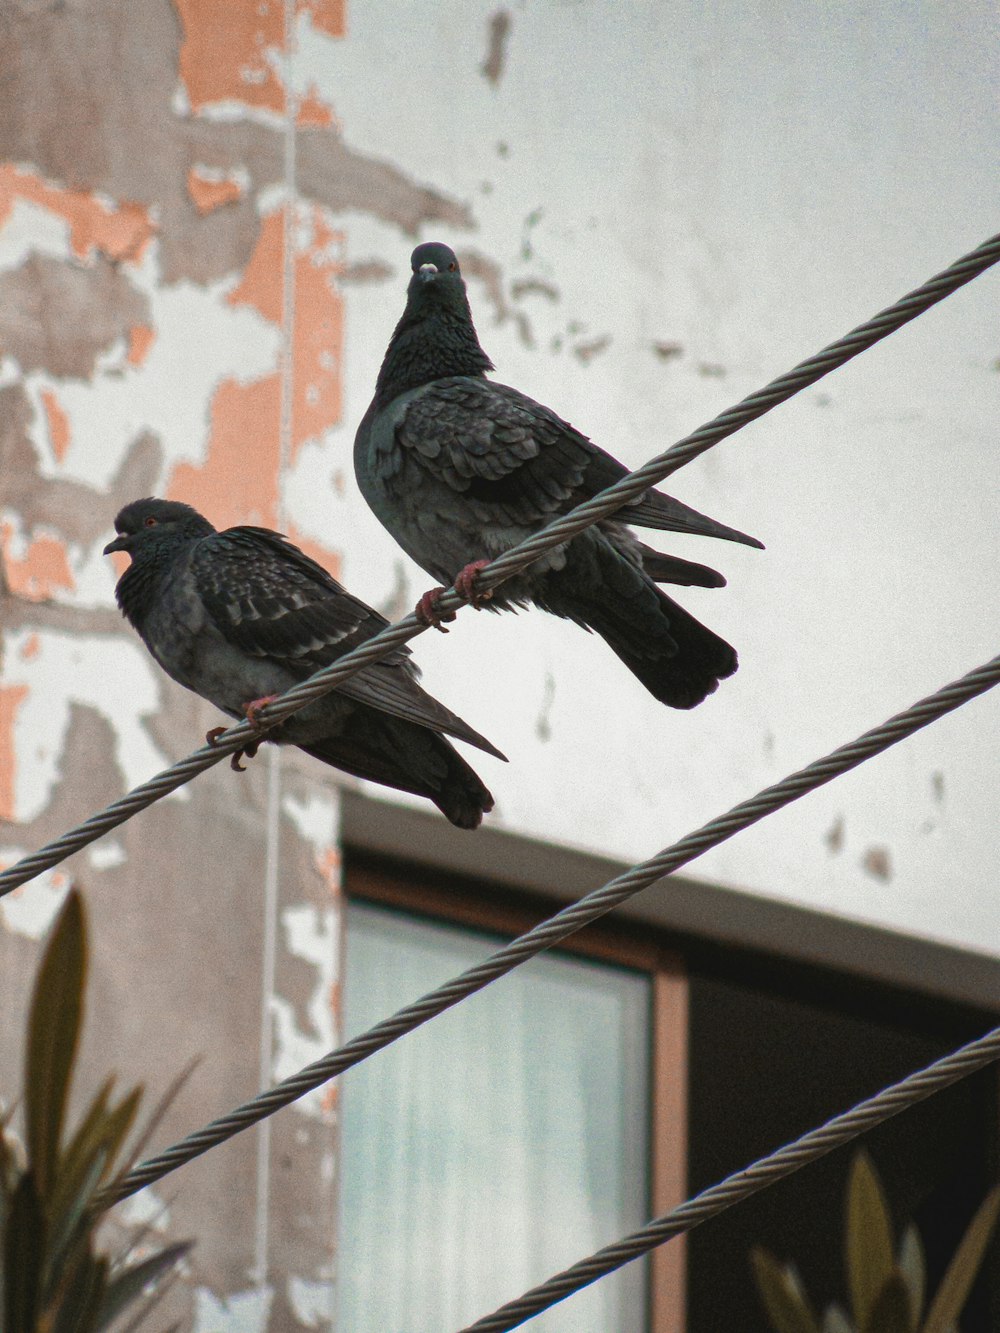 two birds sitting on a wire next to a building